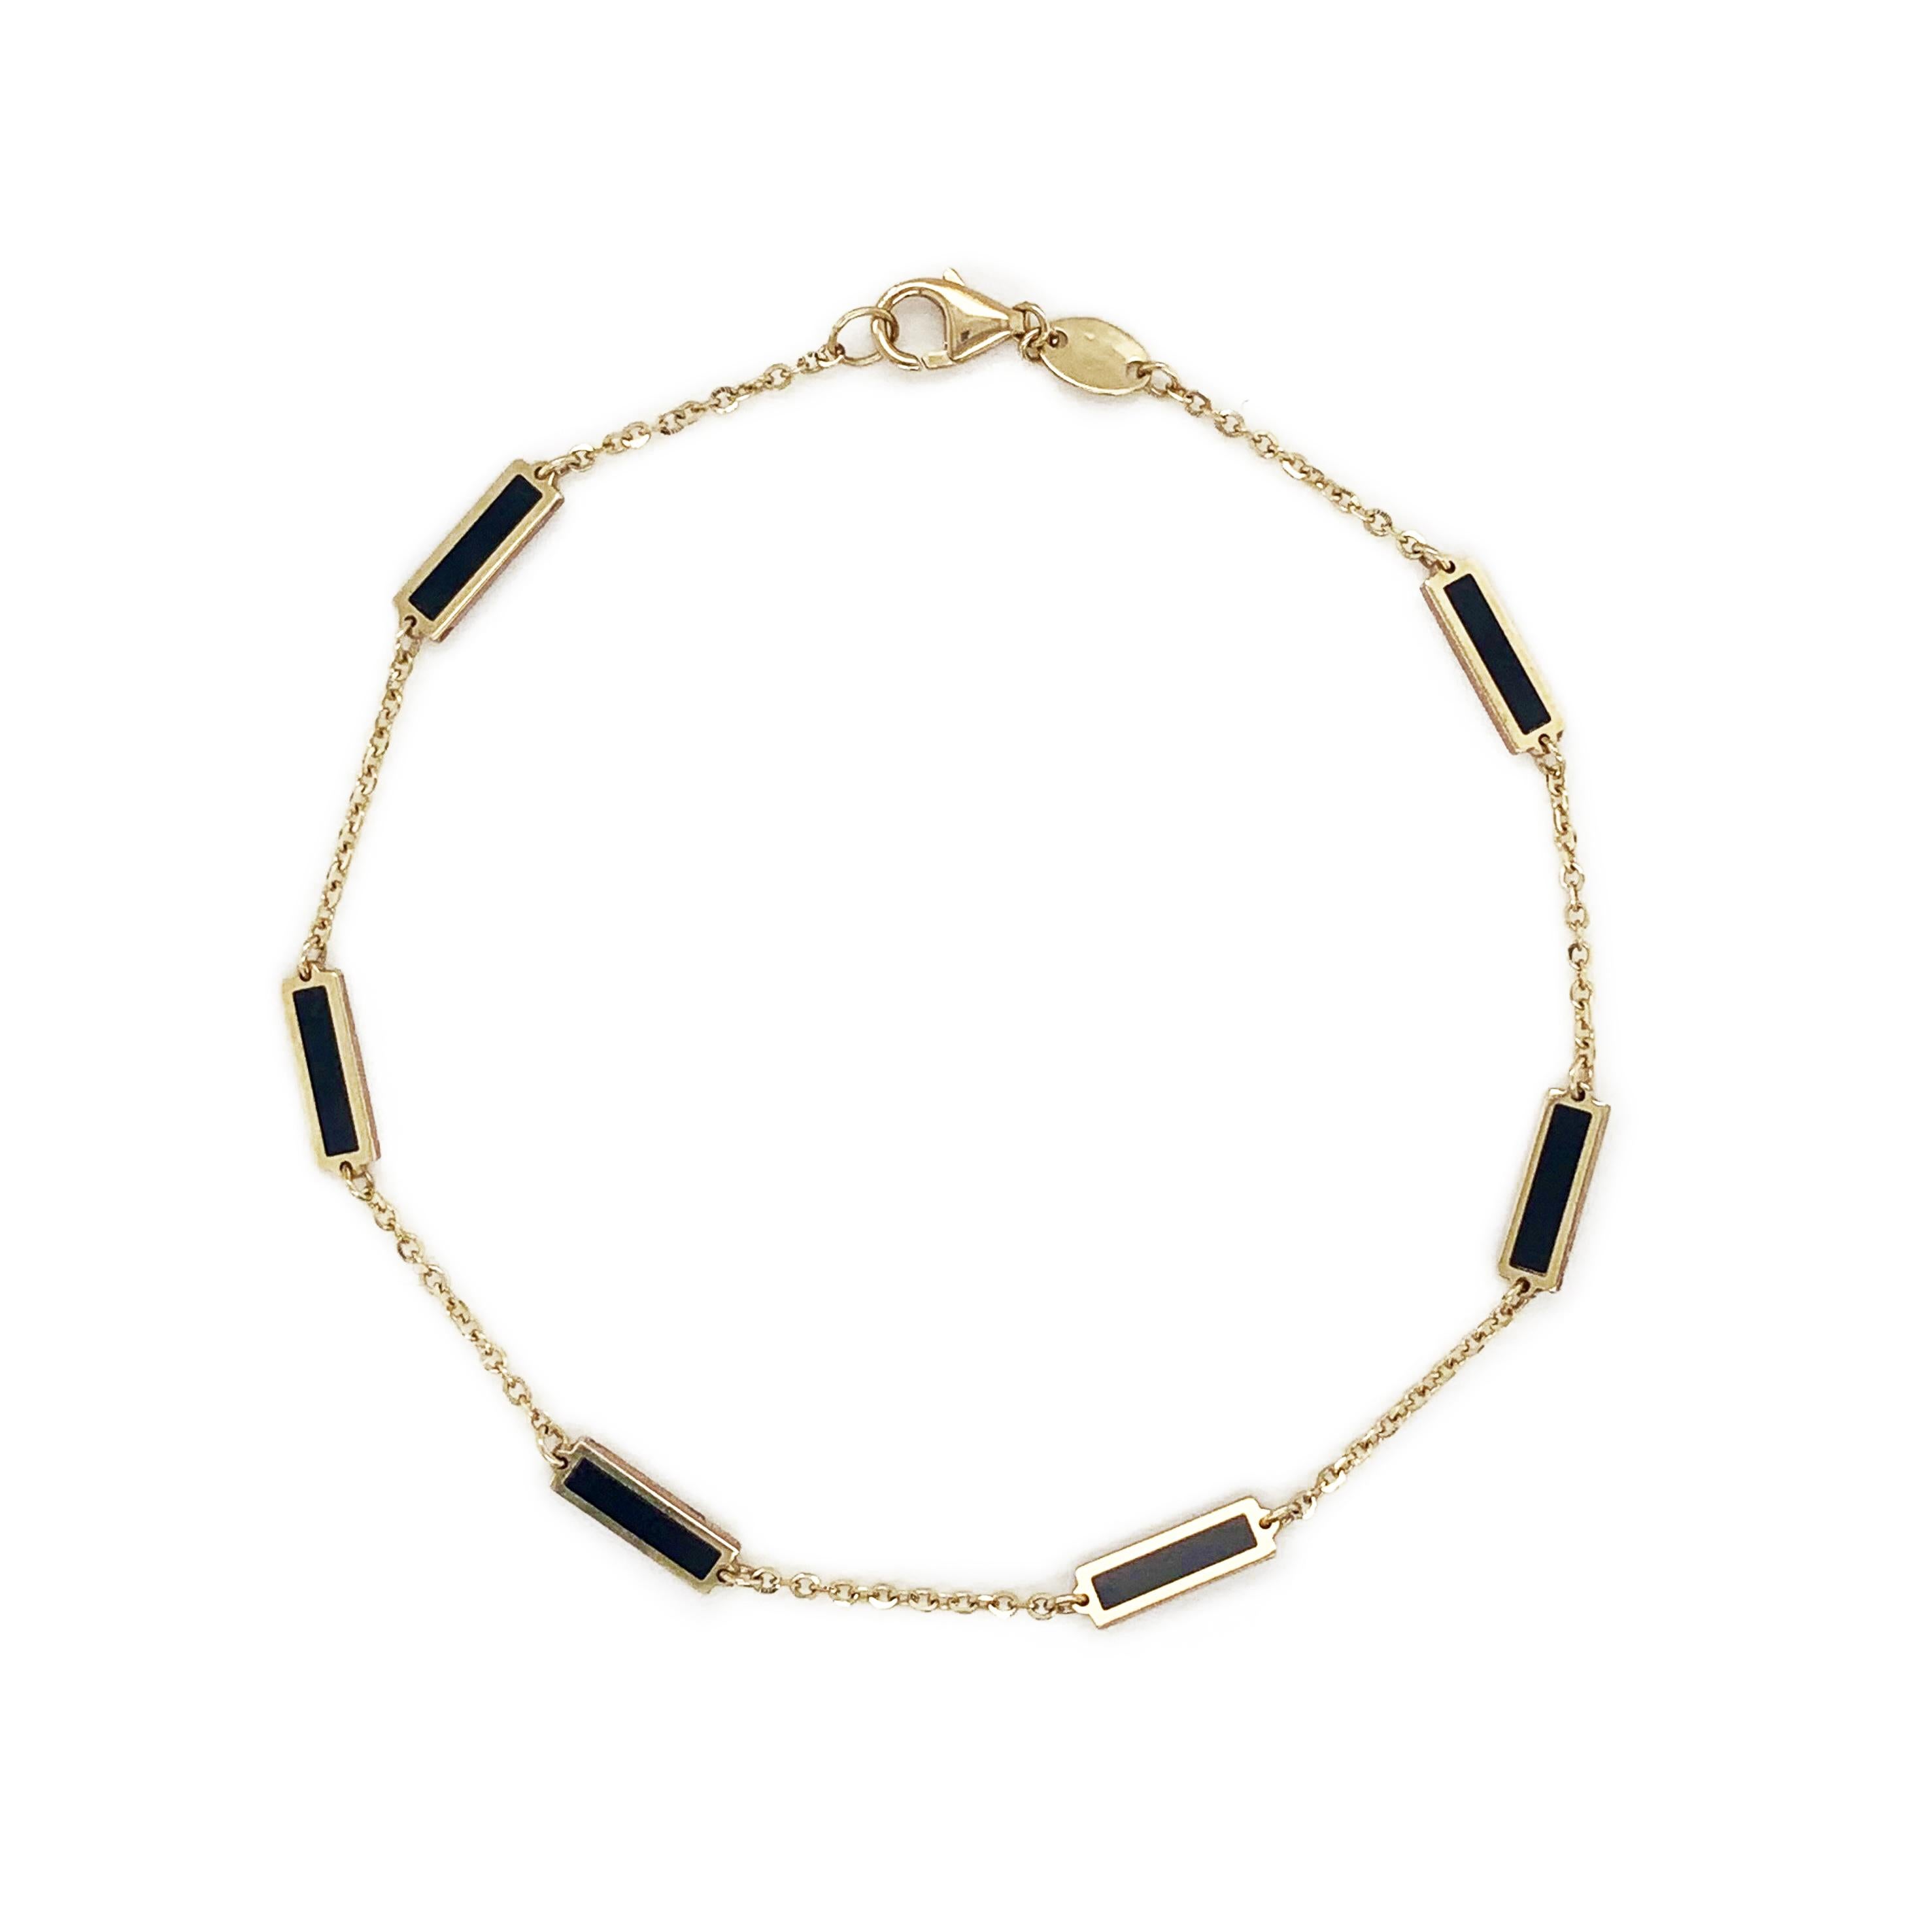 Quality Onyx Bar Bracelet: Focused on design and detail, these beautiful Onyx gemstone bracelet of your choice features a station bar design and is crafted of 14k yellow gold. Bracelet measurement is 7